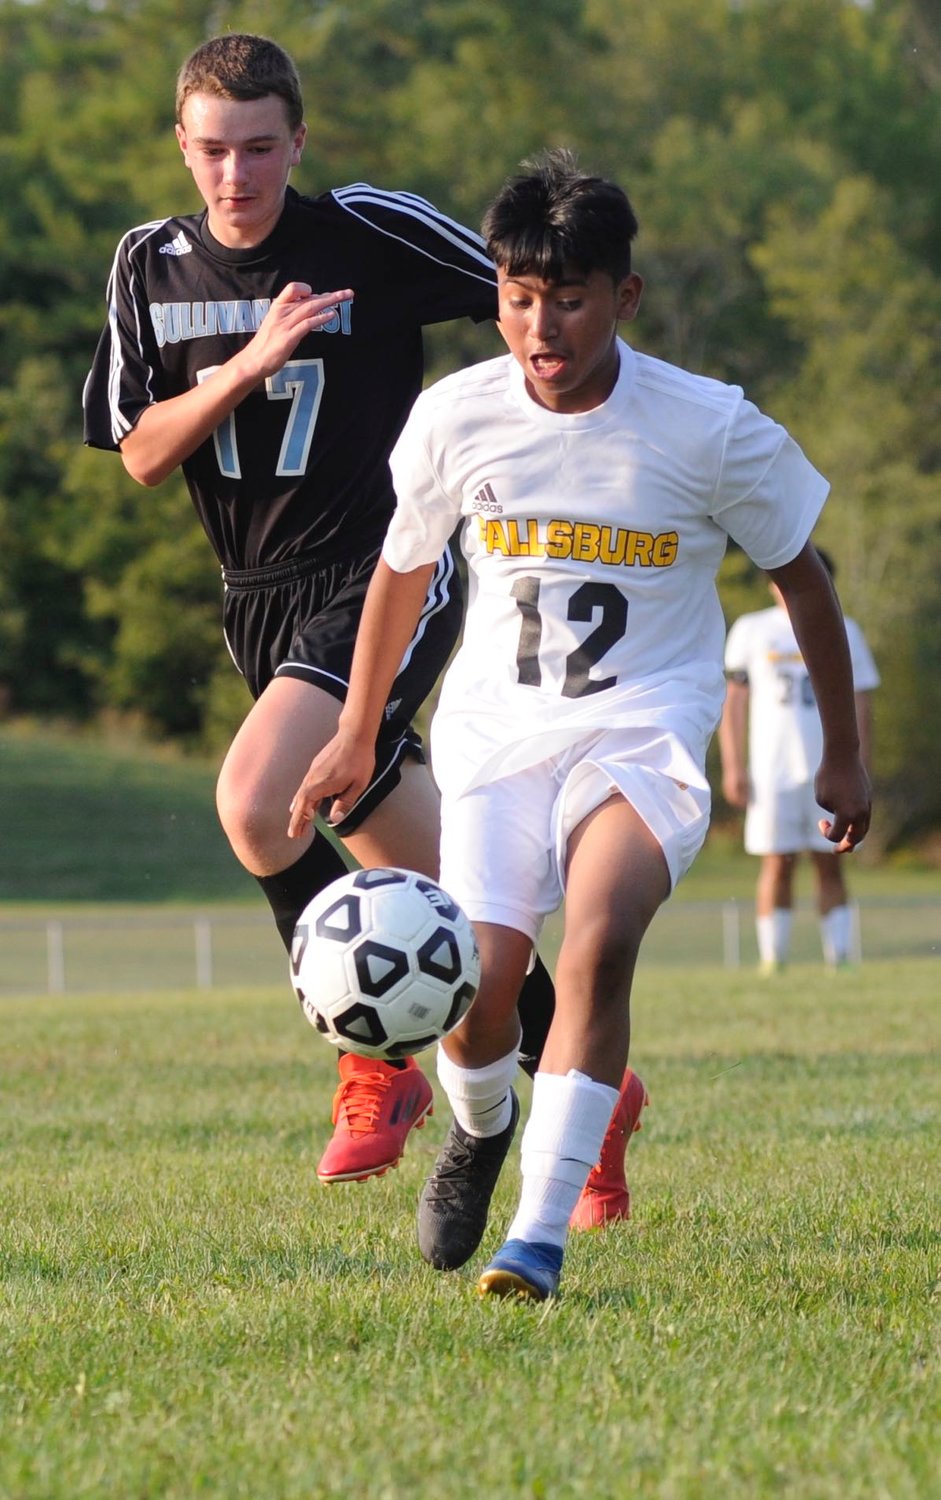 Hot-footin’ it. Sullivan West’s Ethan Hoch is in pursuit of Fallsburg’s Christian Garcia. Earlier in the match, Garcia scored the Comets’ first goal at the 23:00 minute mark in the opening frame.